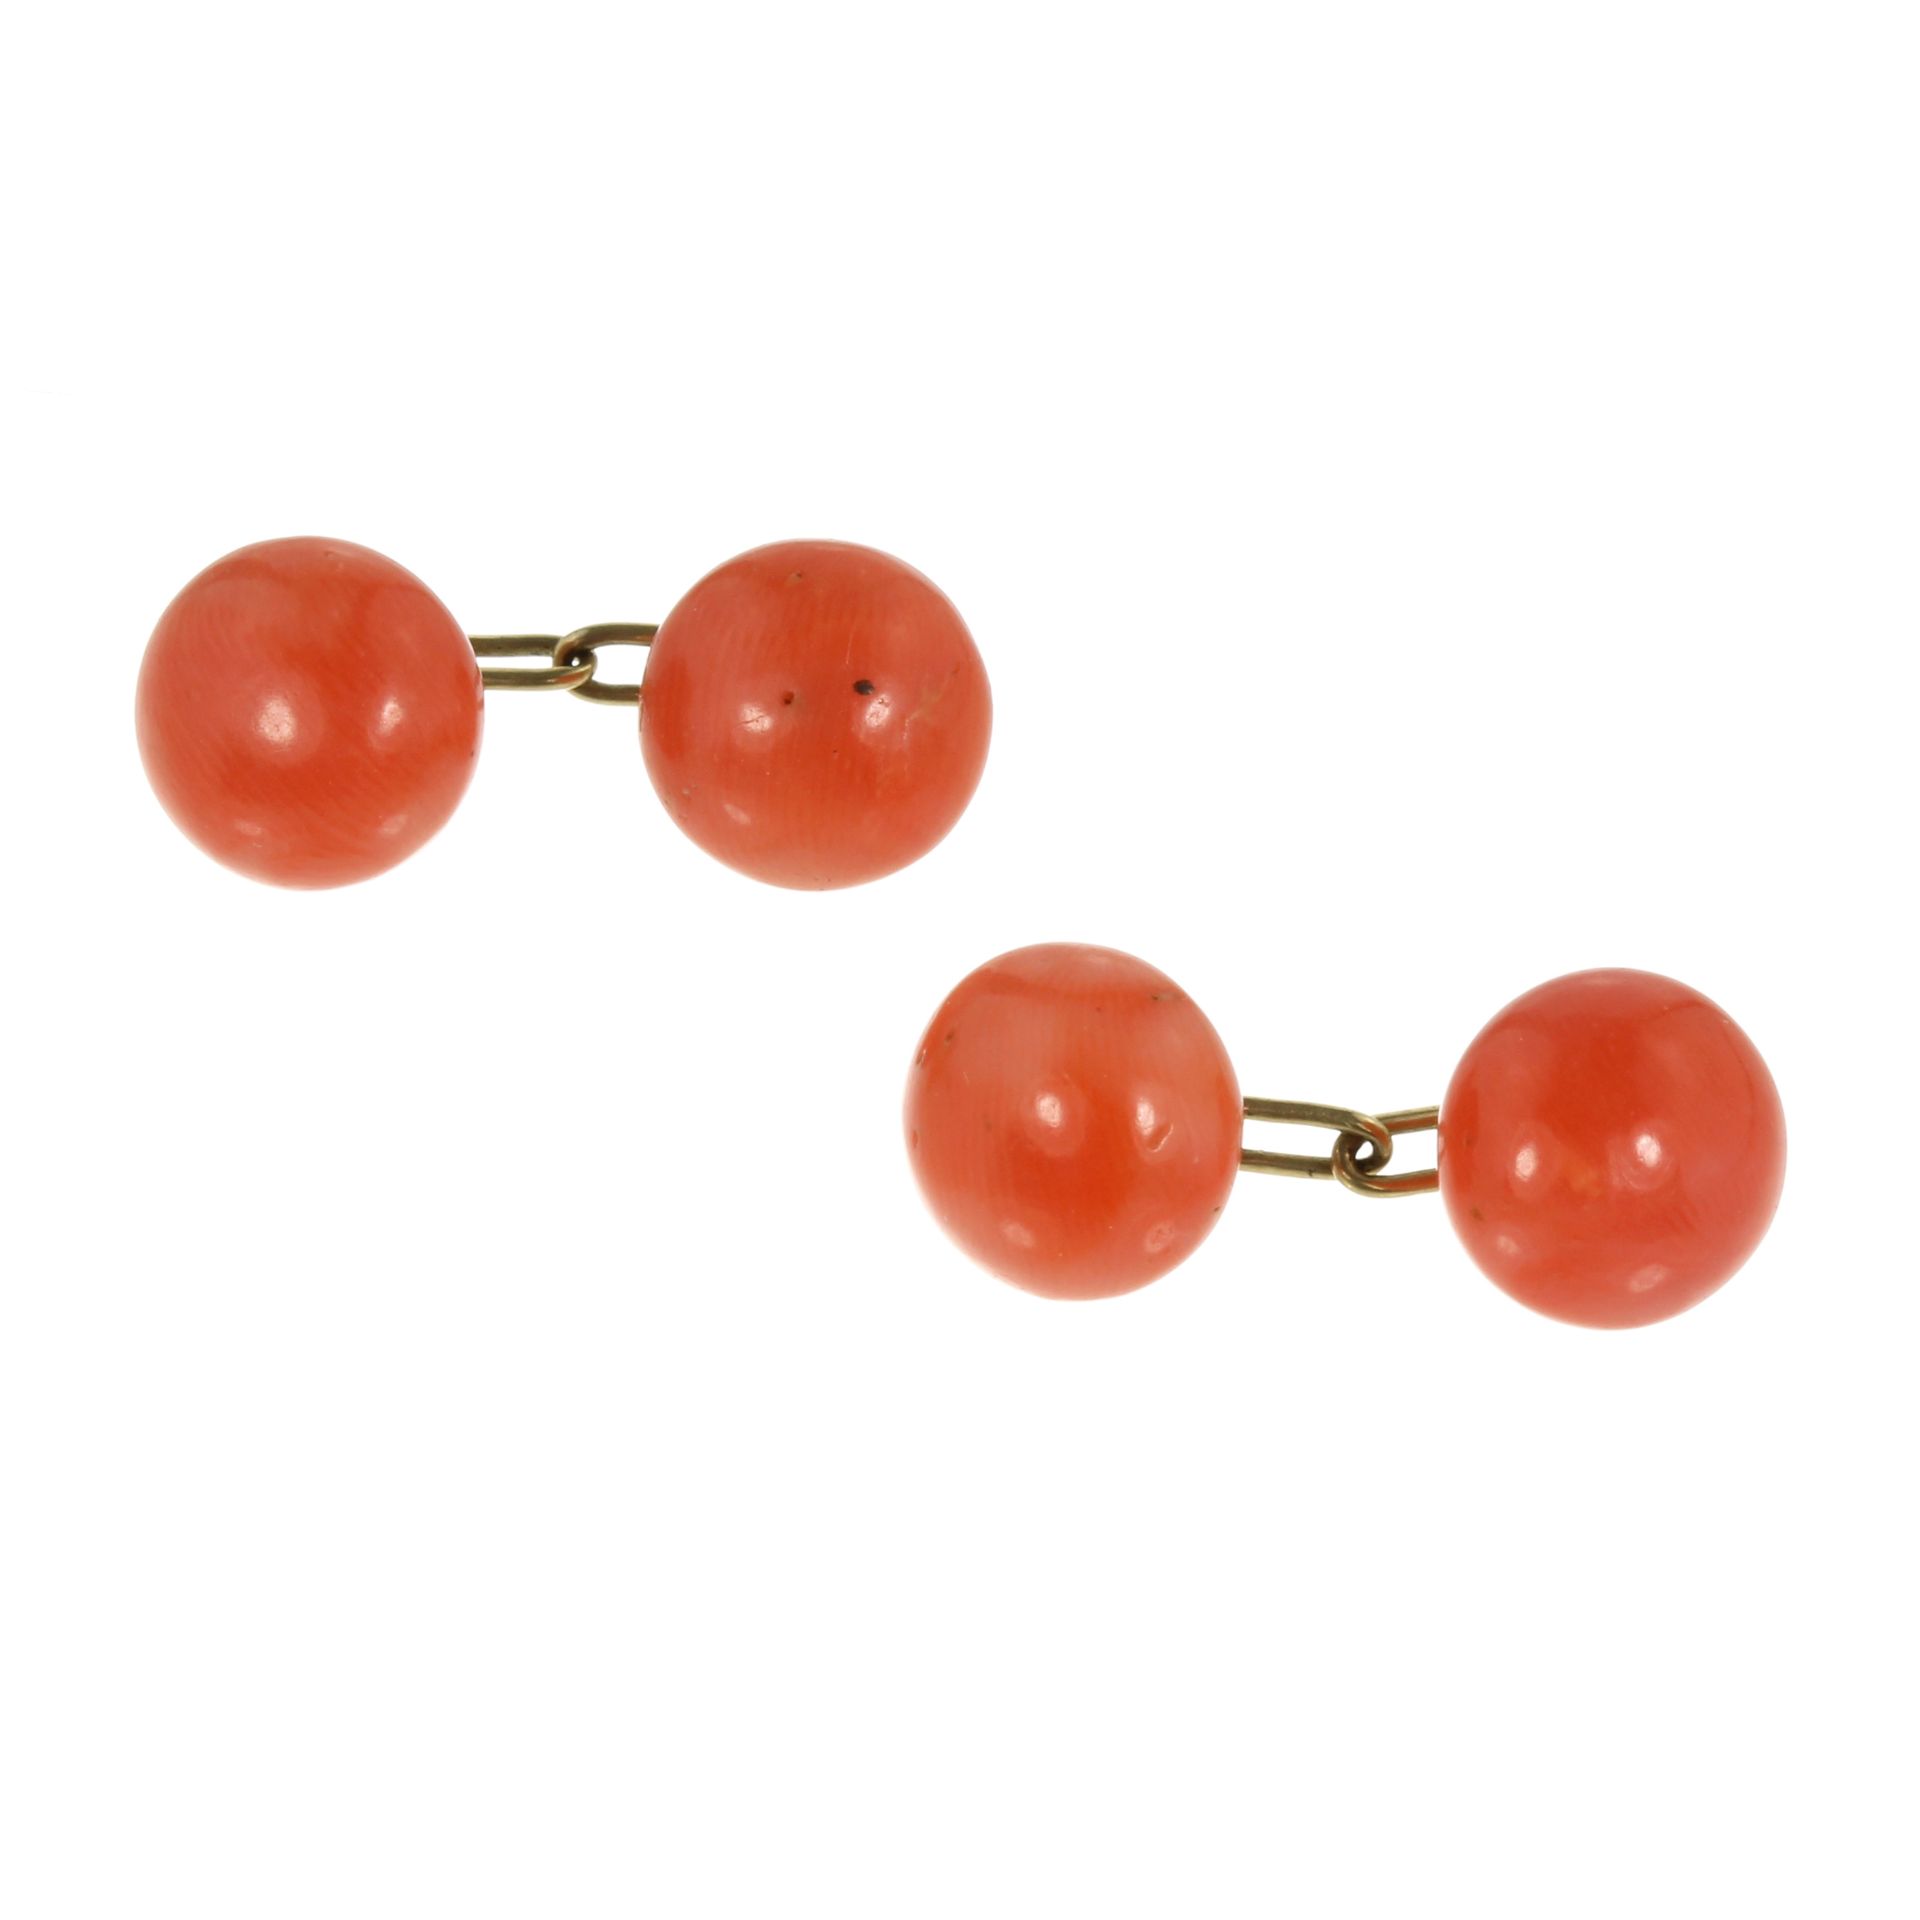 A PAIR OF ANTIQUE CORAL BEAD CUFFLINKS each comprising two polished coral beads of 10-11mm in